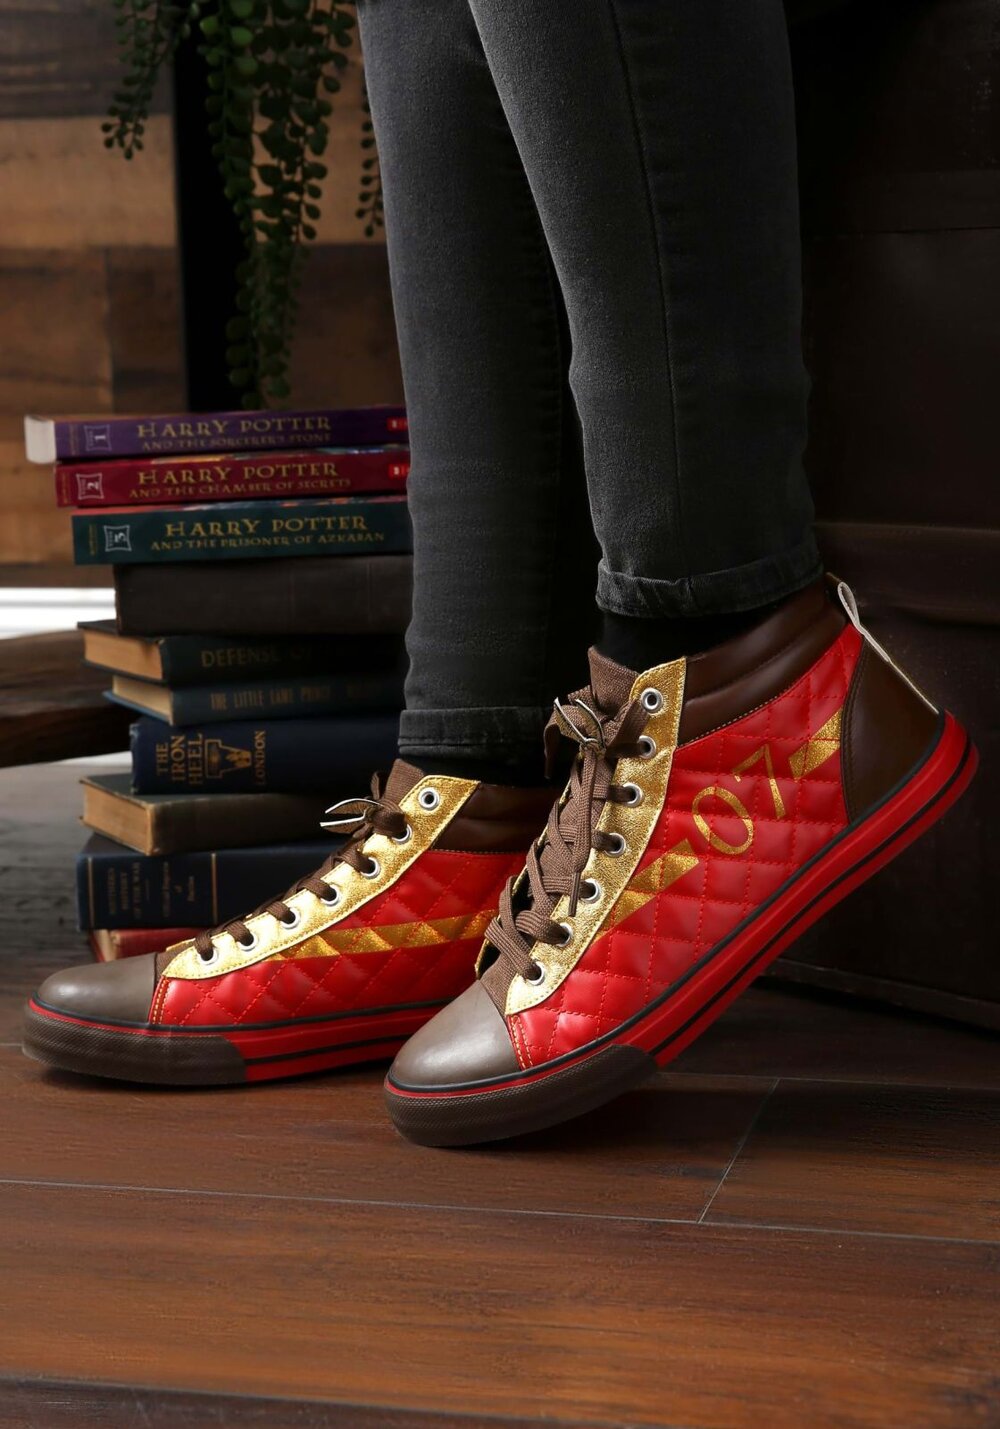 harry-potter-quidditch-shoes-01.jpg